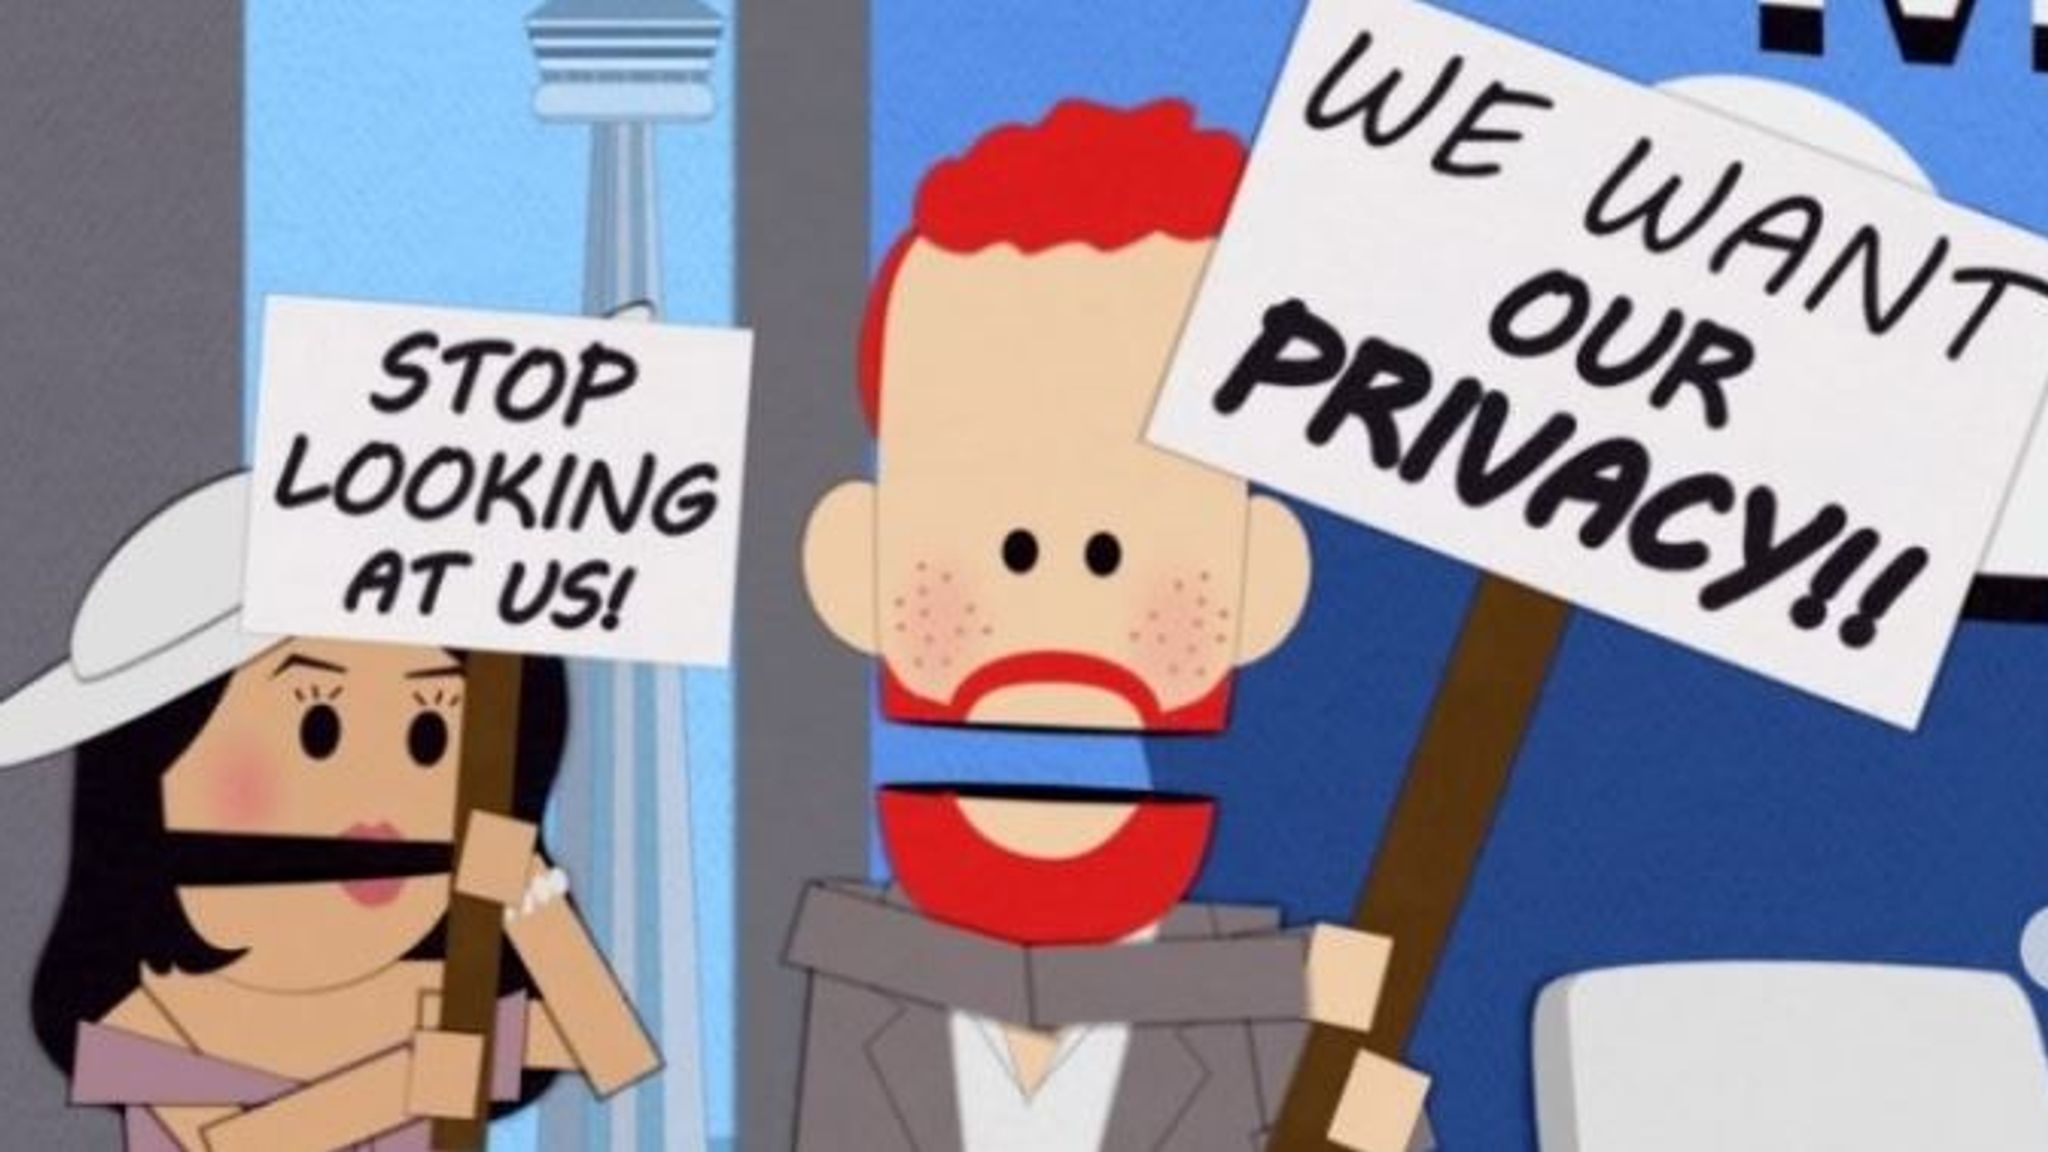 South Park' eviscerates Prince Harry and Meghan Markle amid 'Spare' fallout